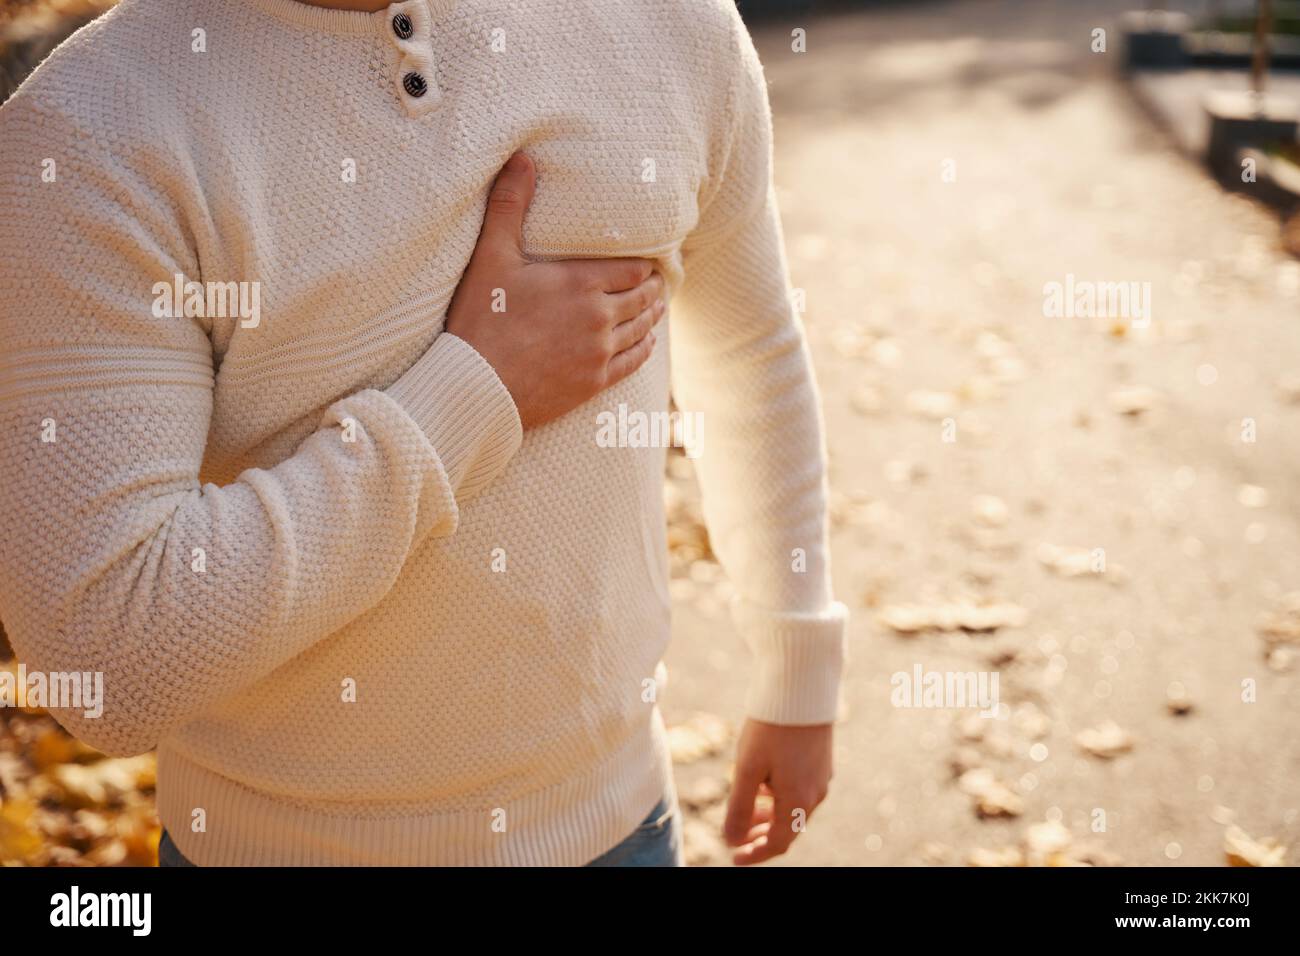 Moung man stands on park alley and holds to his sternum Stock Photo